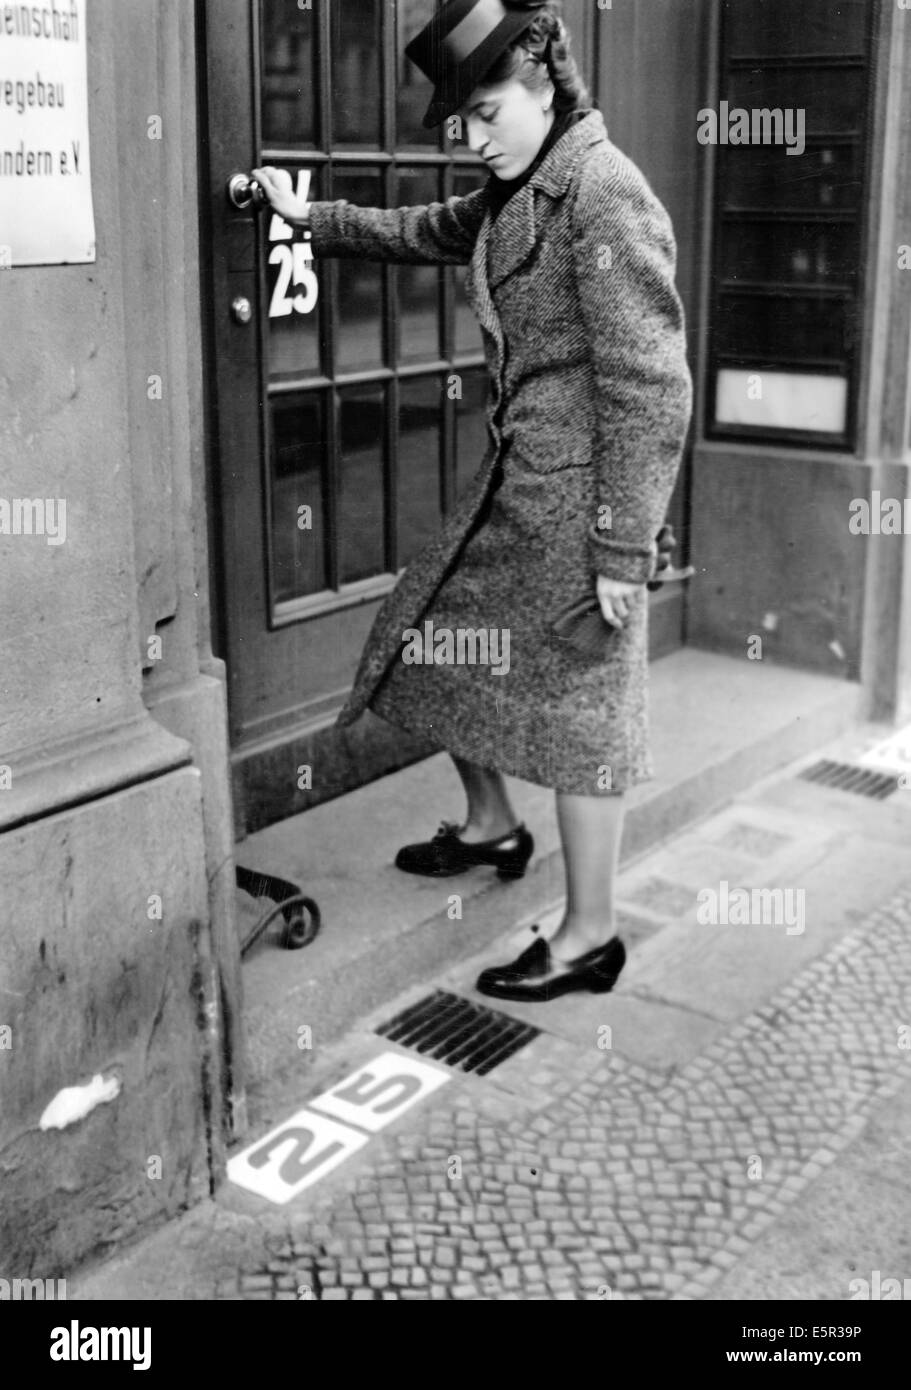 The picture from a Nazi news report shows a woman walking into a building next to the newly introduced address number stones  in Berlin, Germany, November 1940. The original text on the back of the picture reads: 'Here everyone can find the building number. A practical novelty, which is certain to enjoy widespread popularity soon. This number is outside of the department of 'Steine und Erden' (industrial rocks and minerals) in Berlin. The green numbers are set in white stone and makes it easy for even short-sighted people to find the building they are looking for.' Photo: Berliner Verlag / Arc Stock Photo